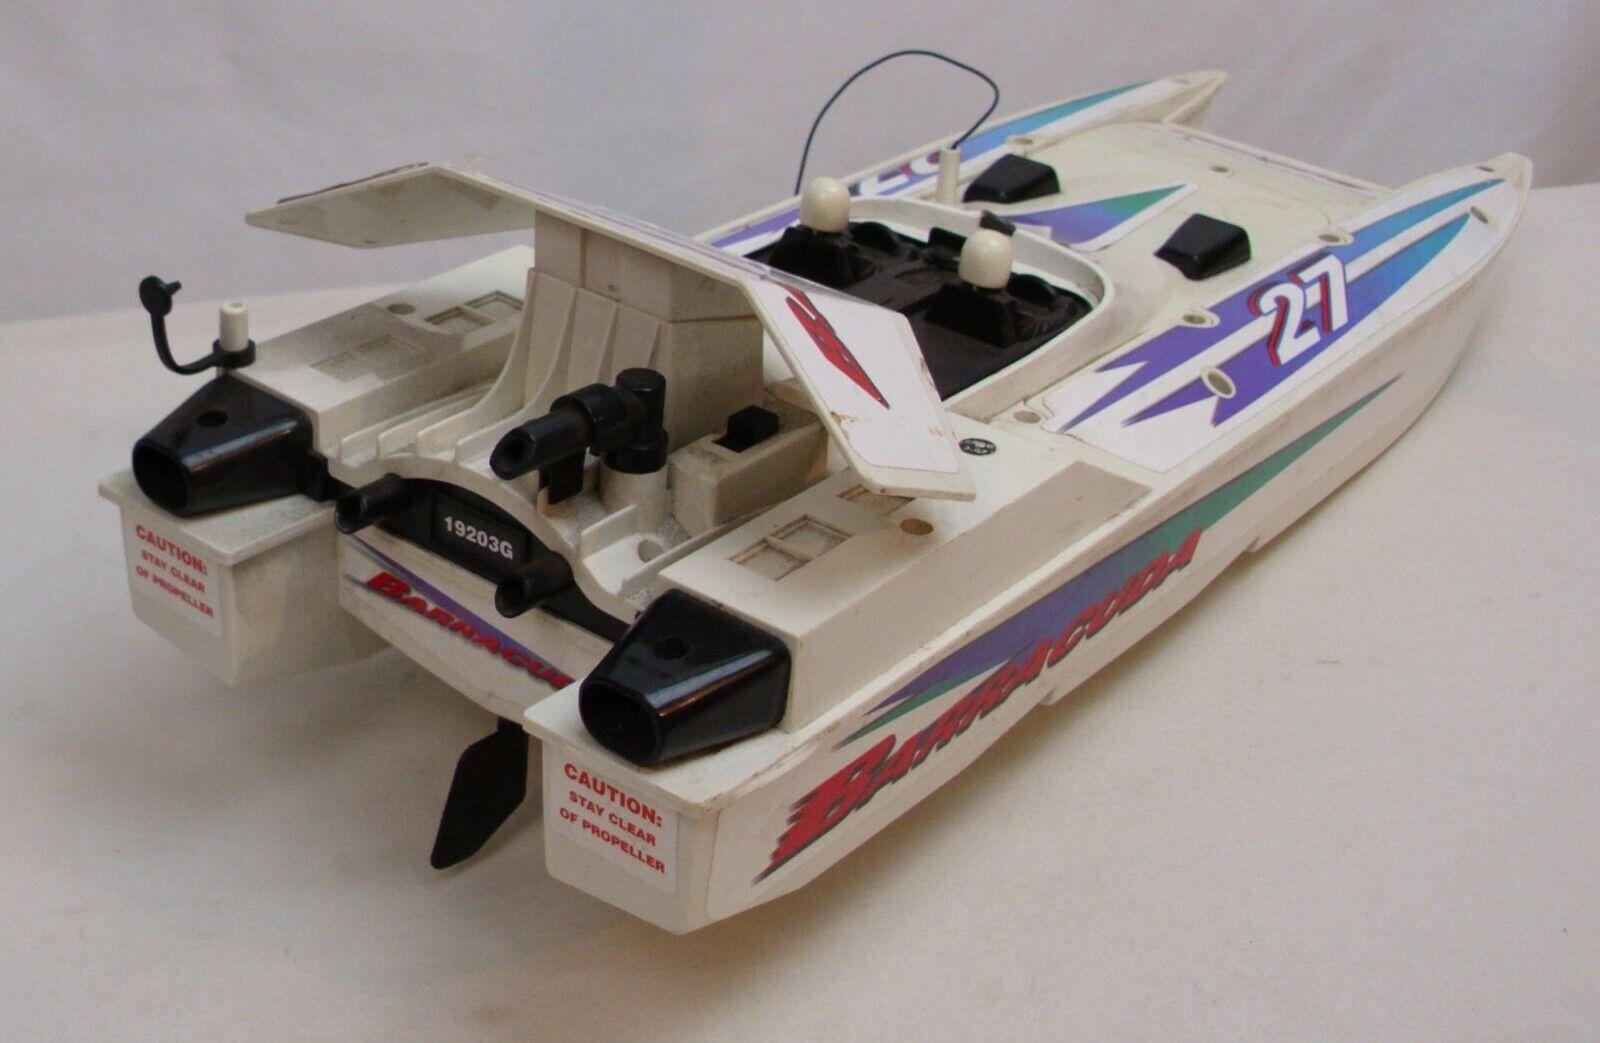 Nikko Radio Control Boat: Size shouldn't be a concern: The impressive features of the Nikko Radio Control Boat outweigh its limited options